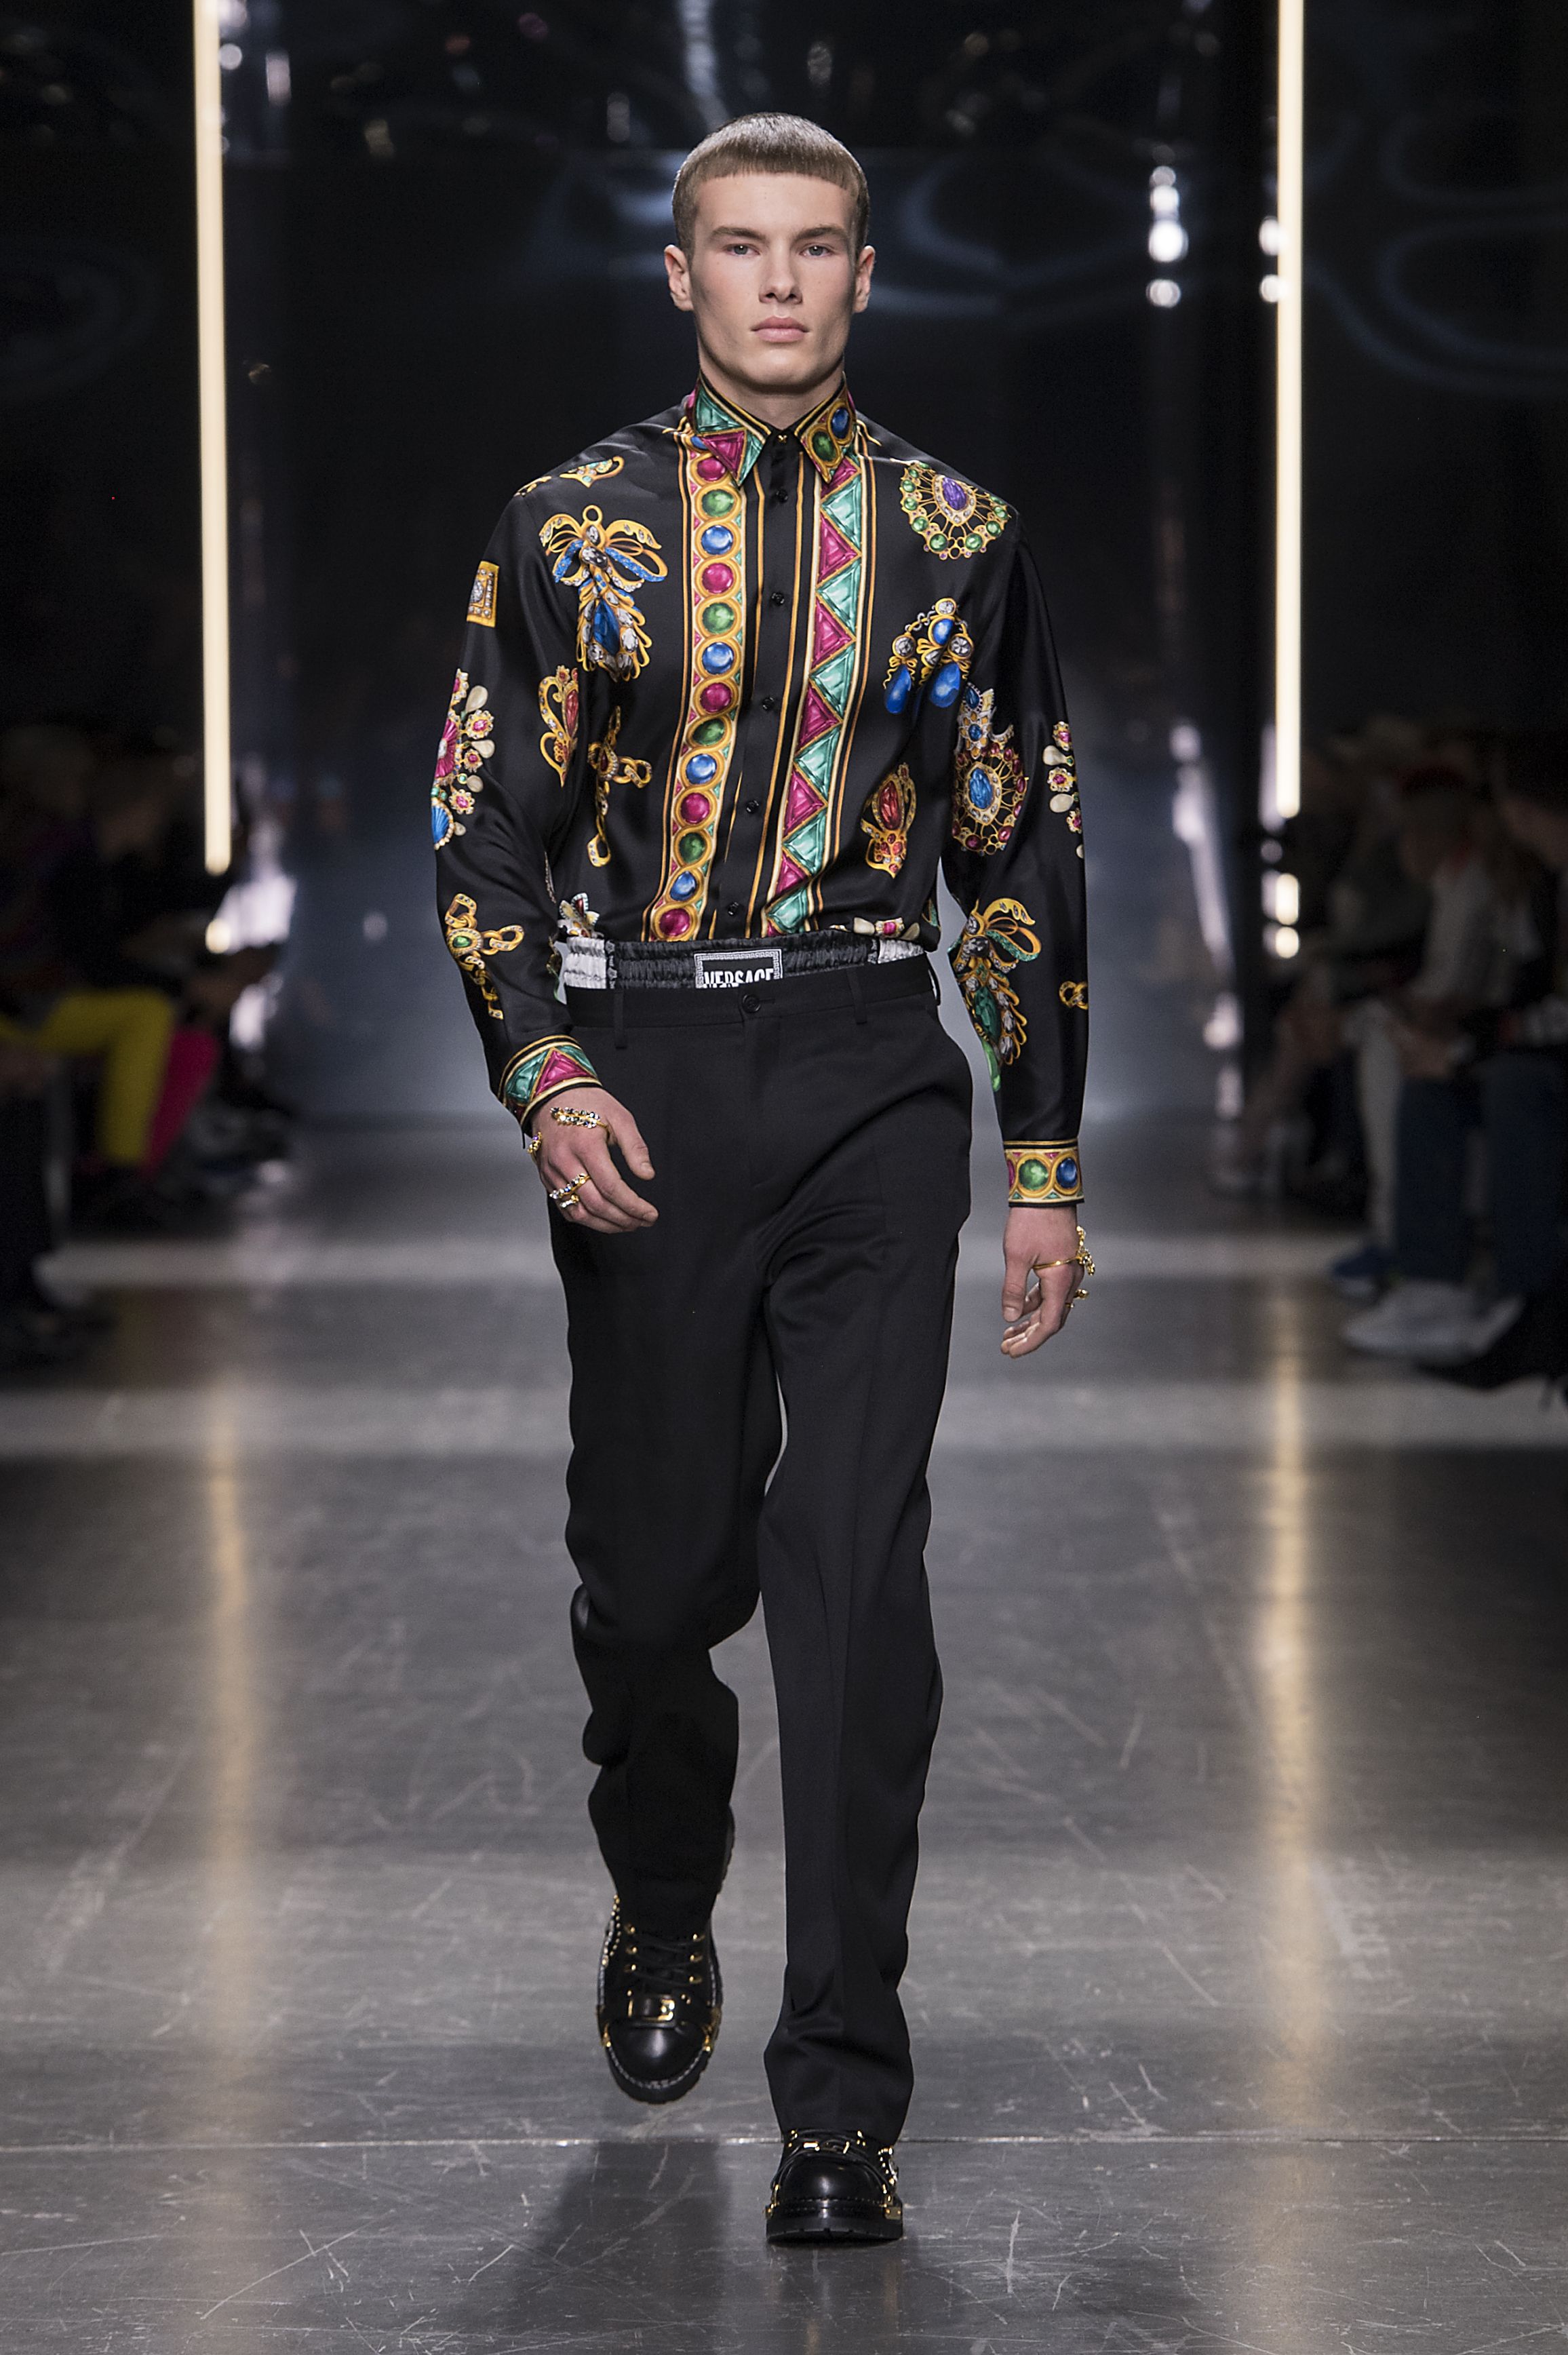 versace male clothing